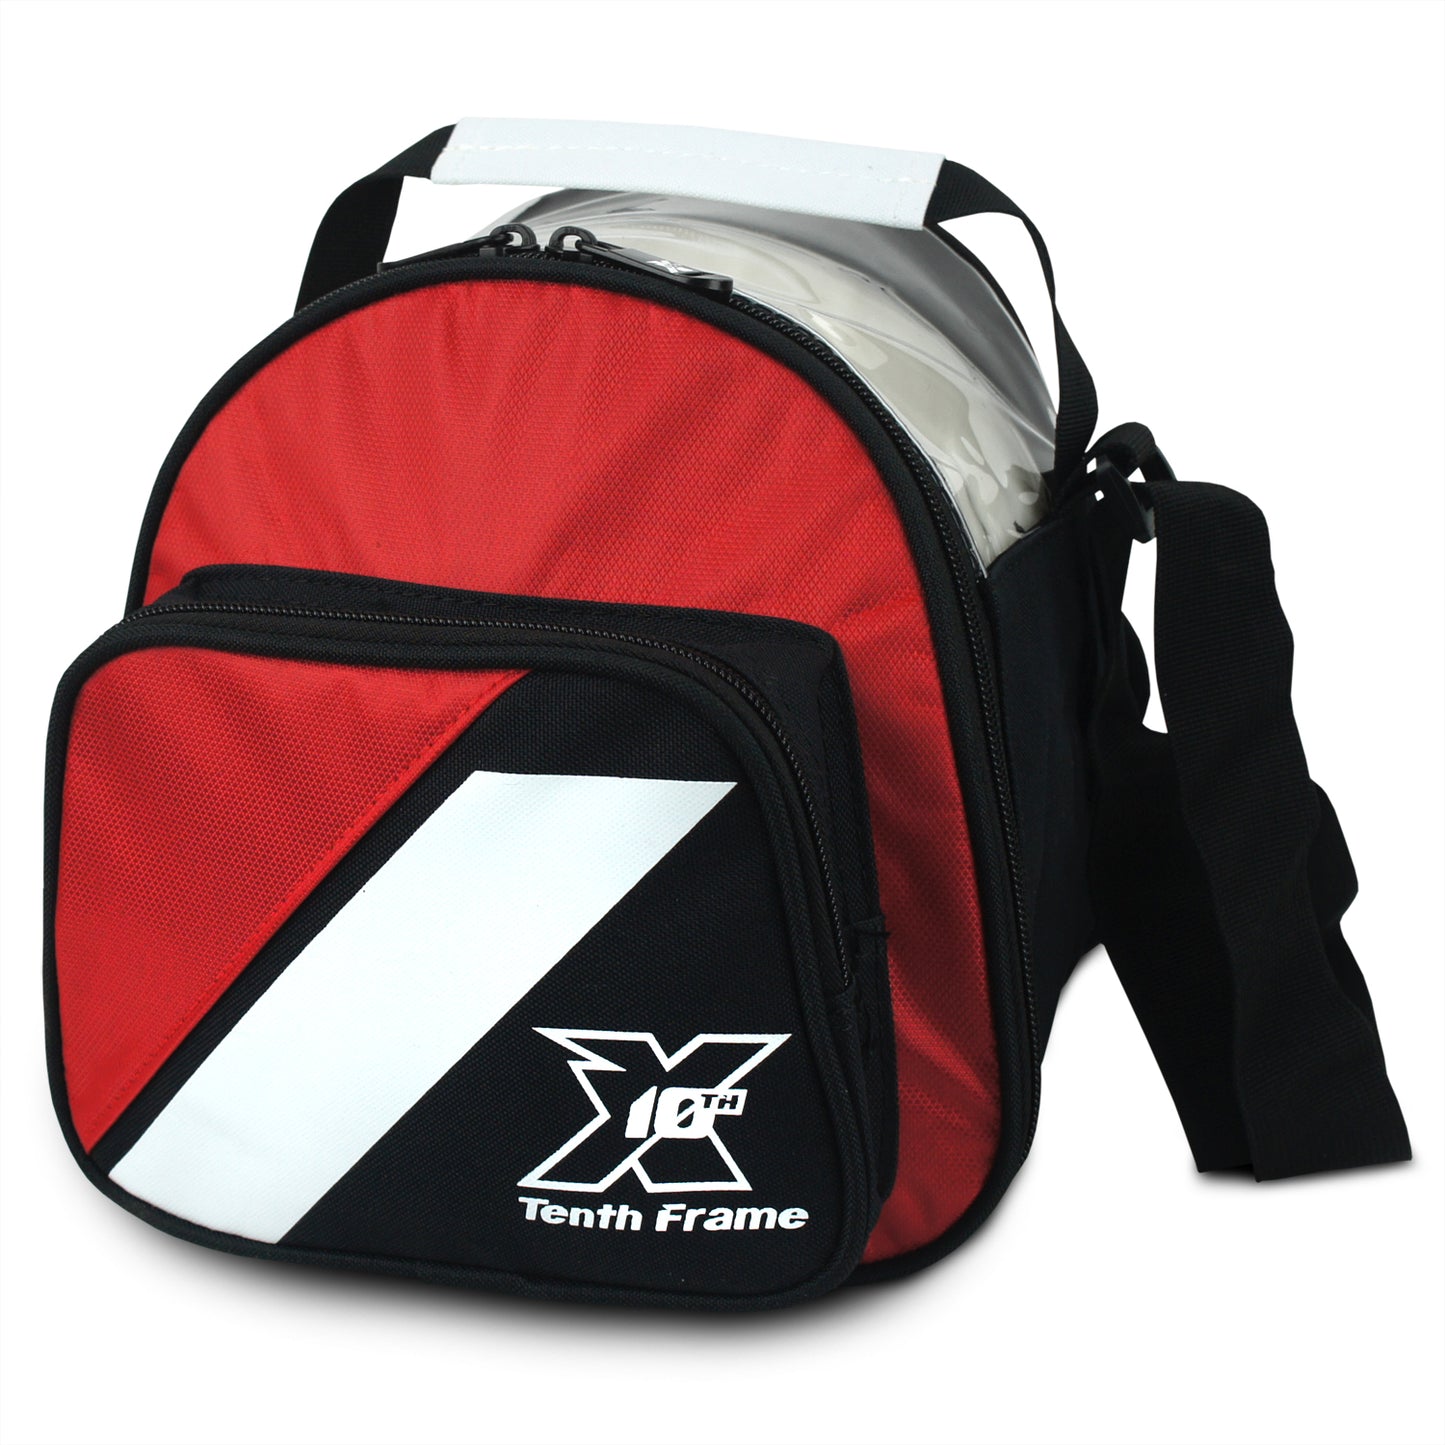 Tenth Frame Deluxe Add-On Bag - 1 Ball Add-On Bowling Bag (Red)